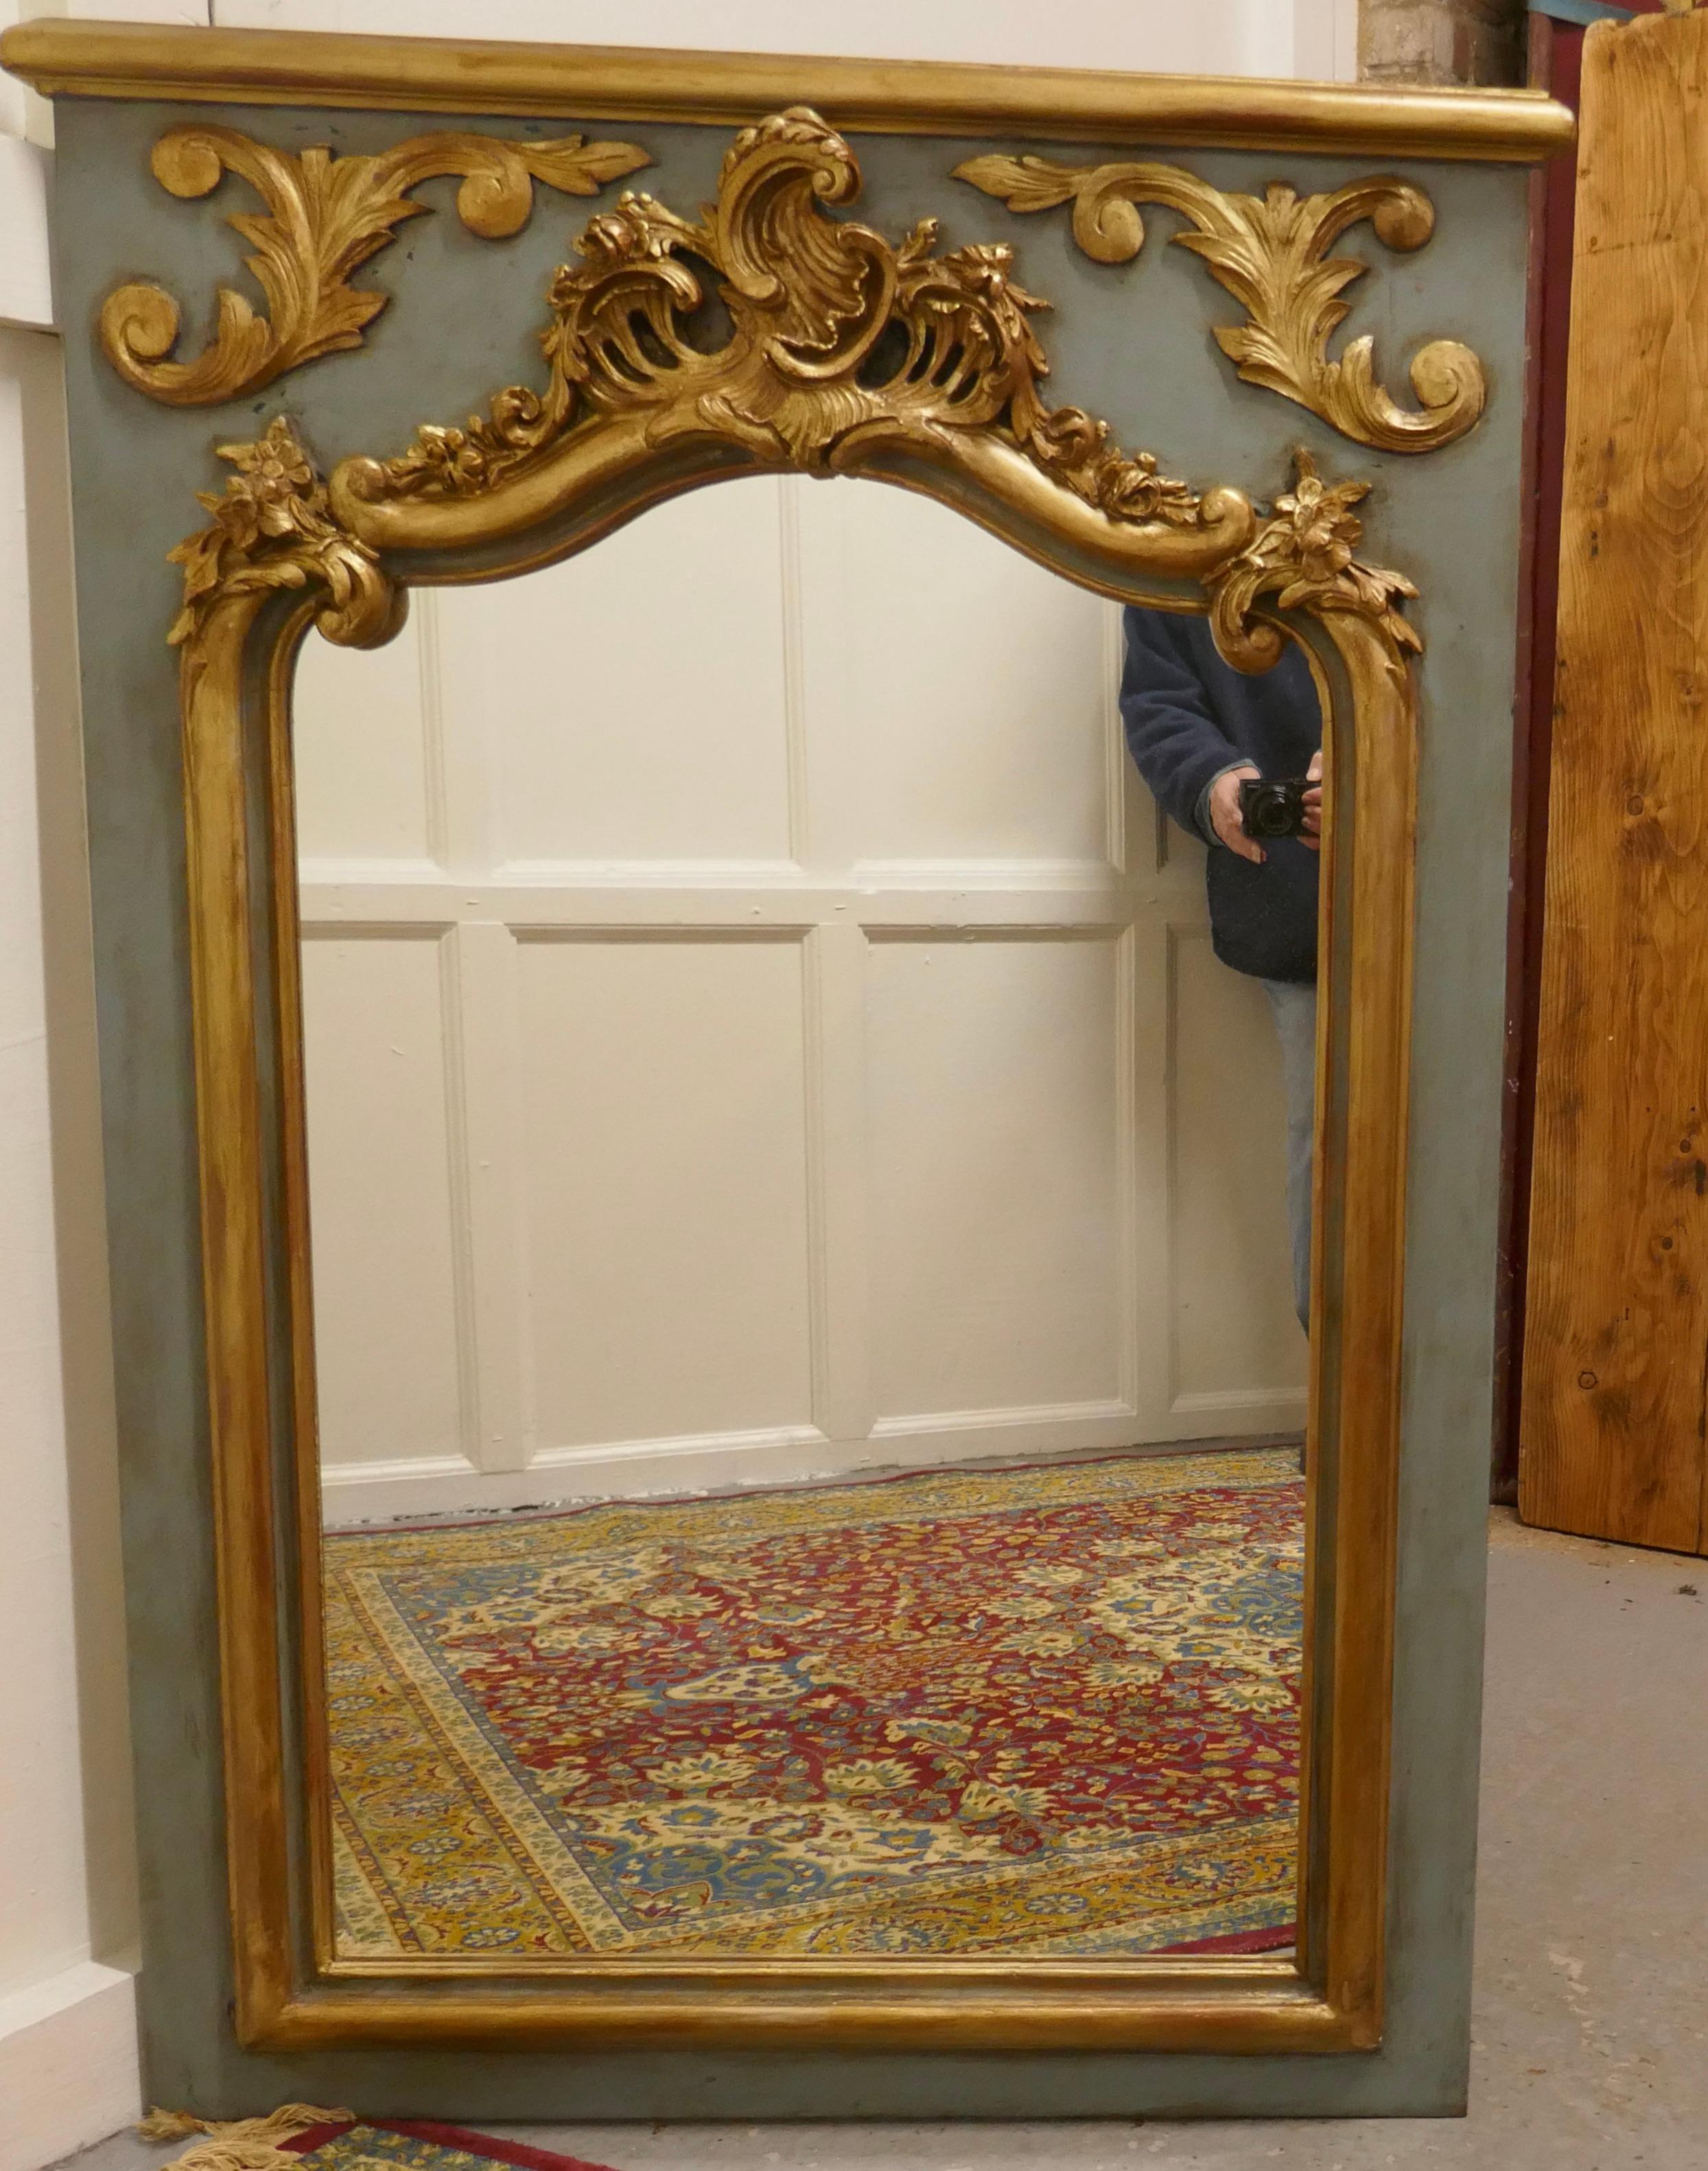 French Napoleon II carved gilt and painted console mirror

This is a very attractive Mirror, the top of the mirror has scalloped Arch shape, bordered with gilt gesso carvings which are set on a painted frame. The gold gives an attractive look with